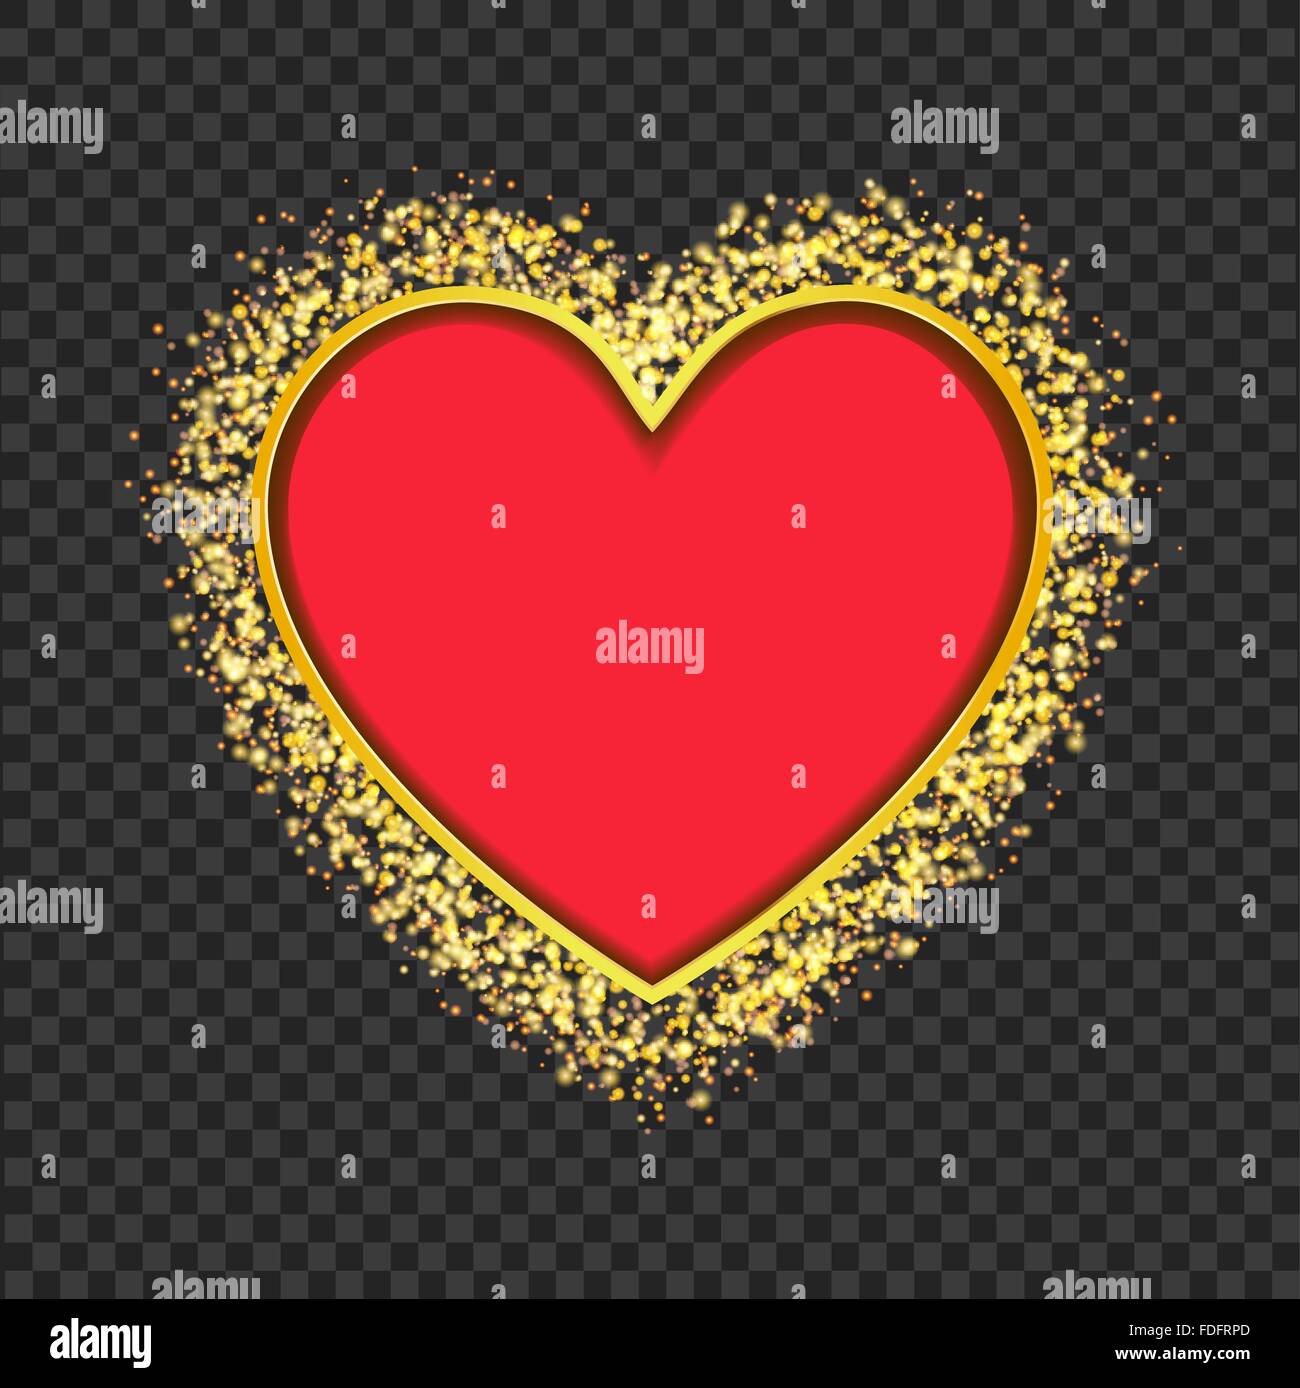 red heart frame with glittering golden transparent particles. vector Stock Vector